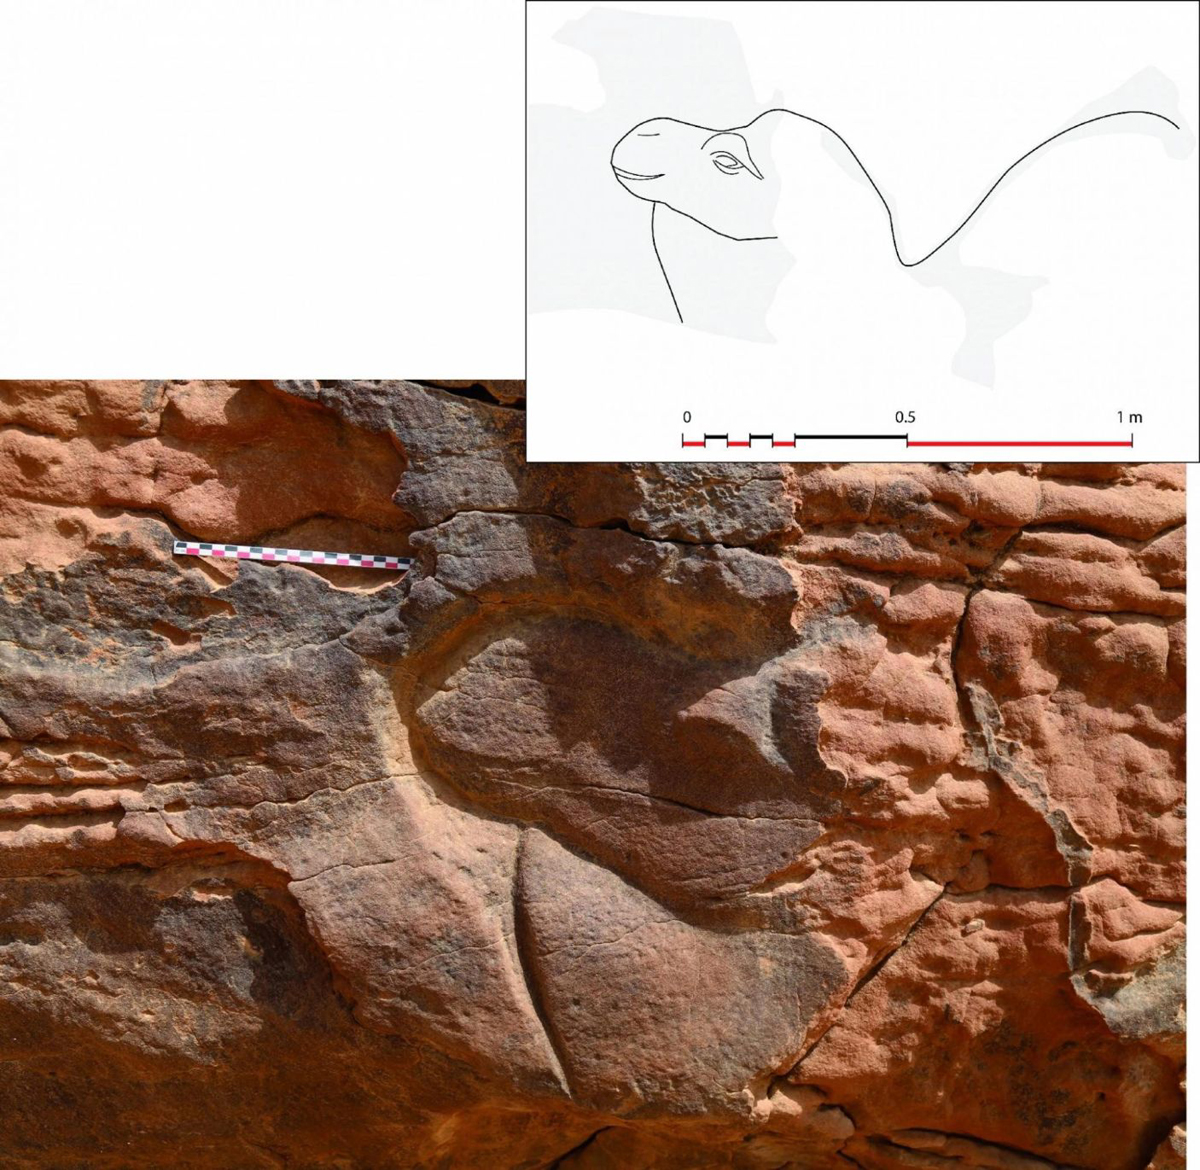 Discovery of life size camel reliefs in Saudi Arabia